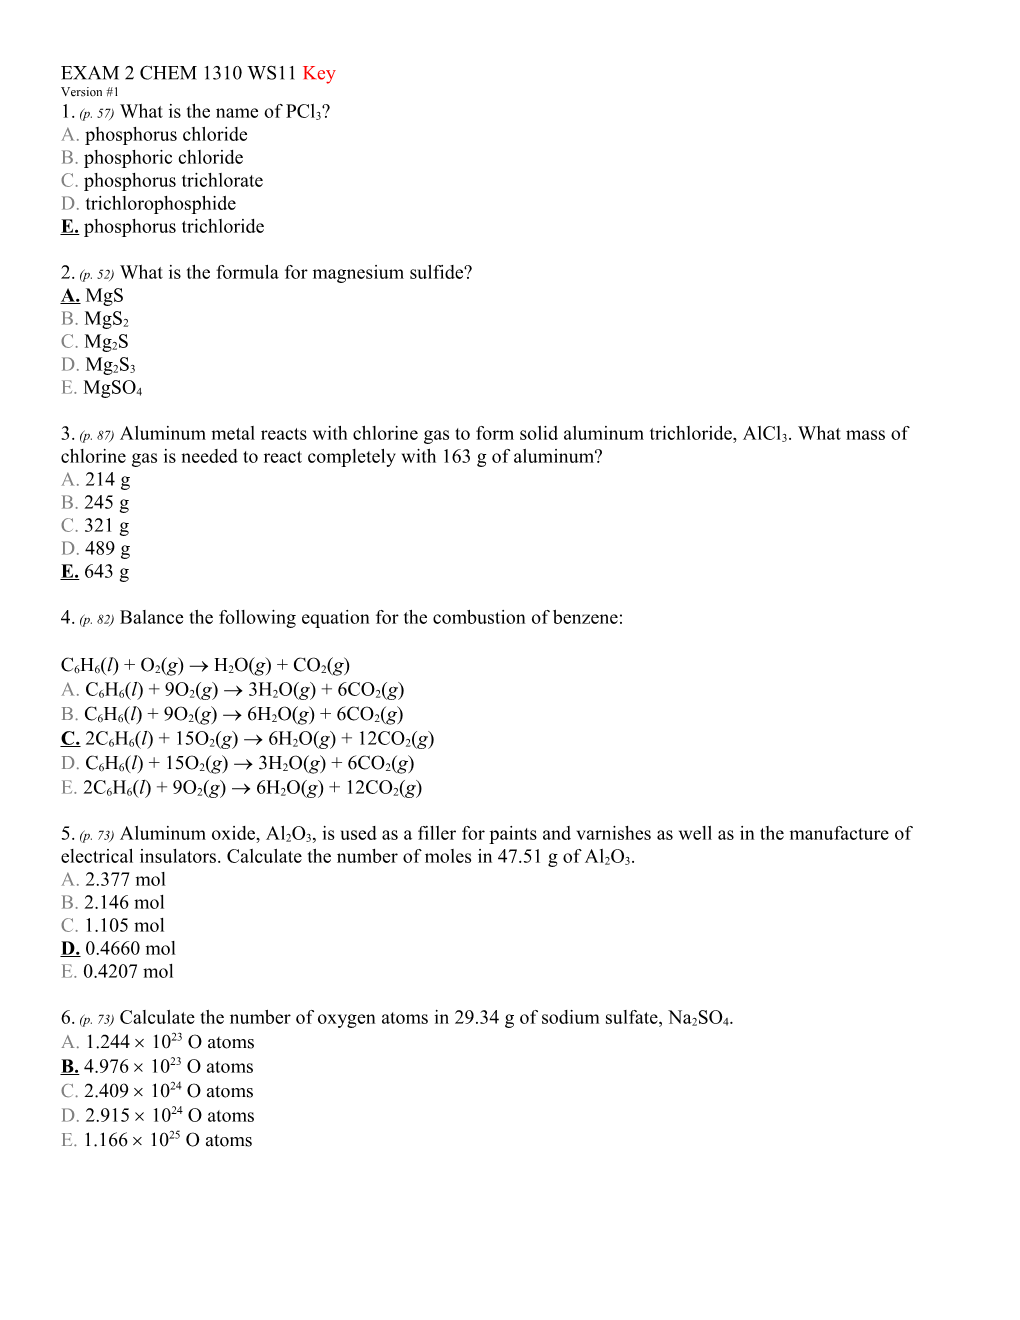 EXAM 2 CHEM 1310 WS11 Key Version #1 1. (P. 57) What Is the Name of Pcl3? A. Phosphorus